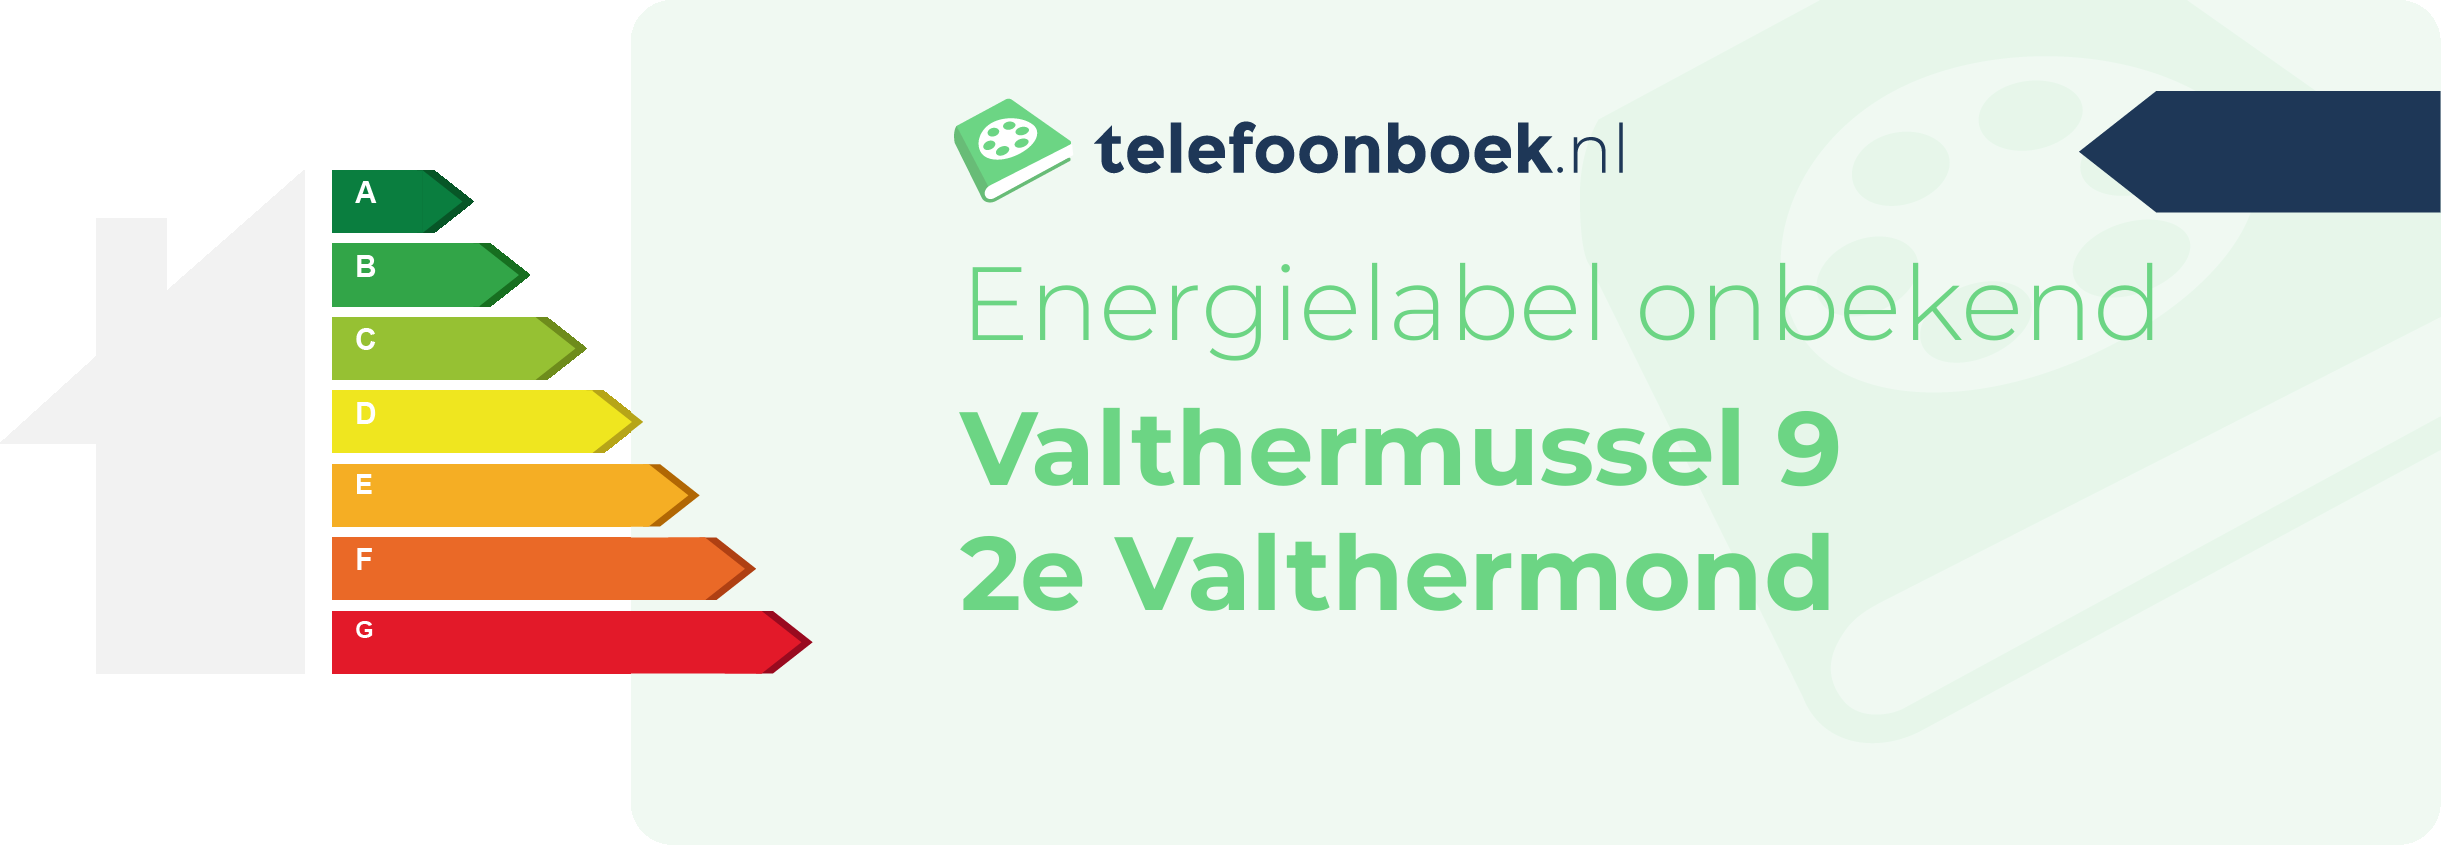 Energielabel Valthermussel 9 2e Valthermond